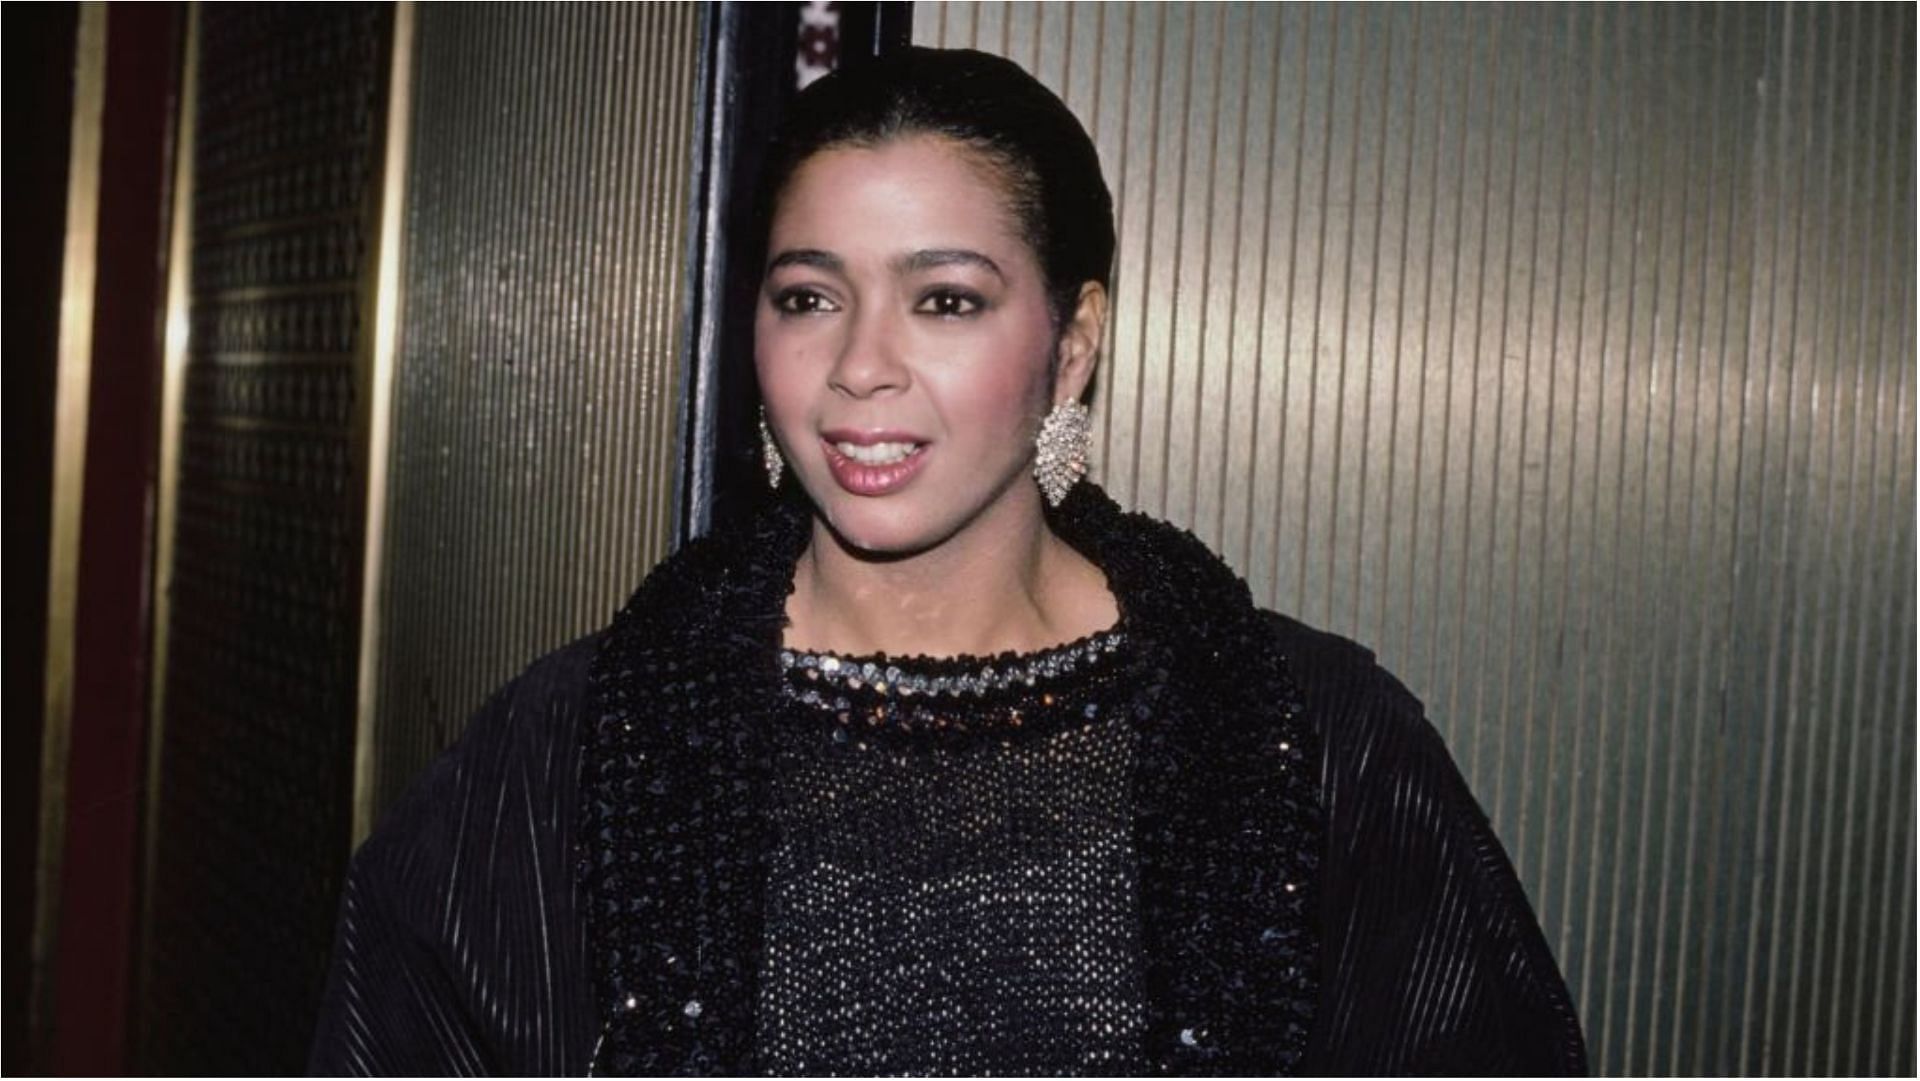 What Was Irene Cara's Net Worth: Cause Of Death Revealed